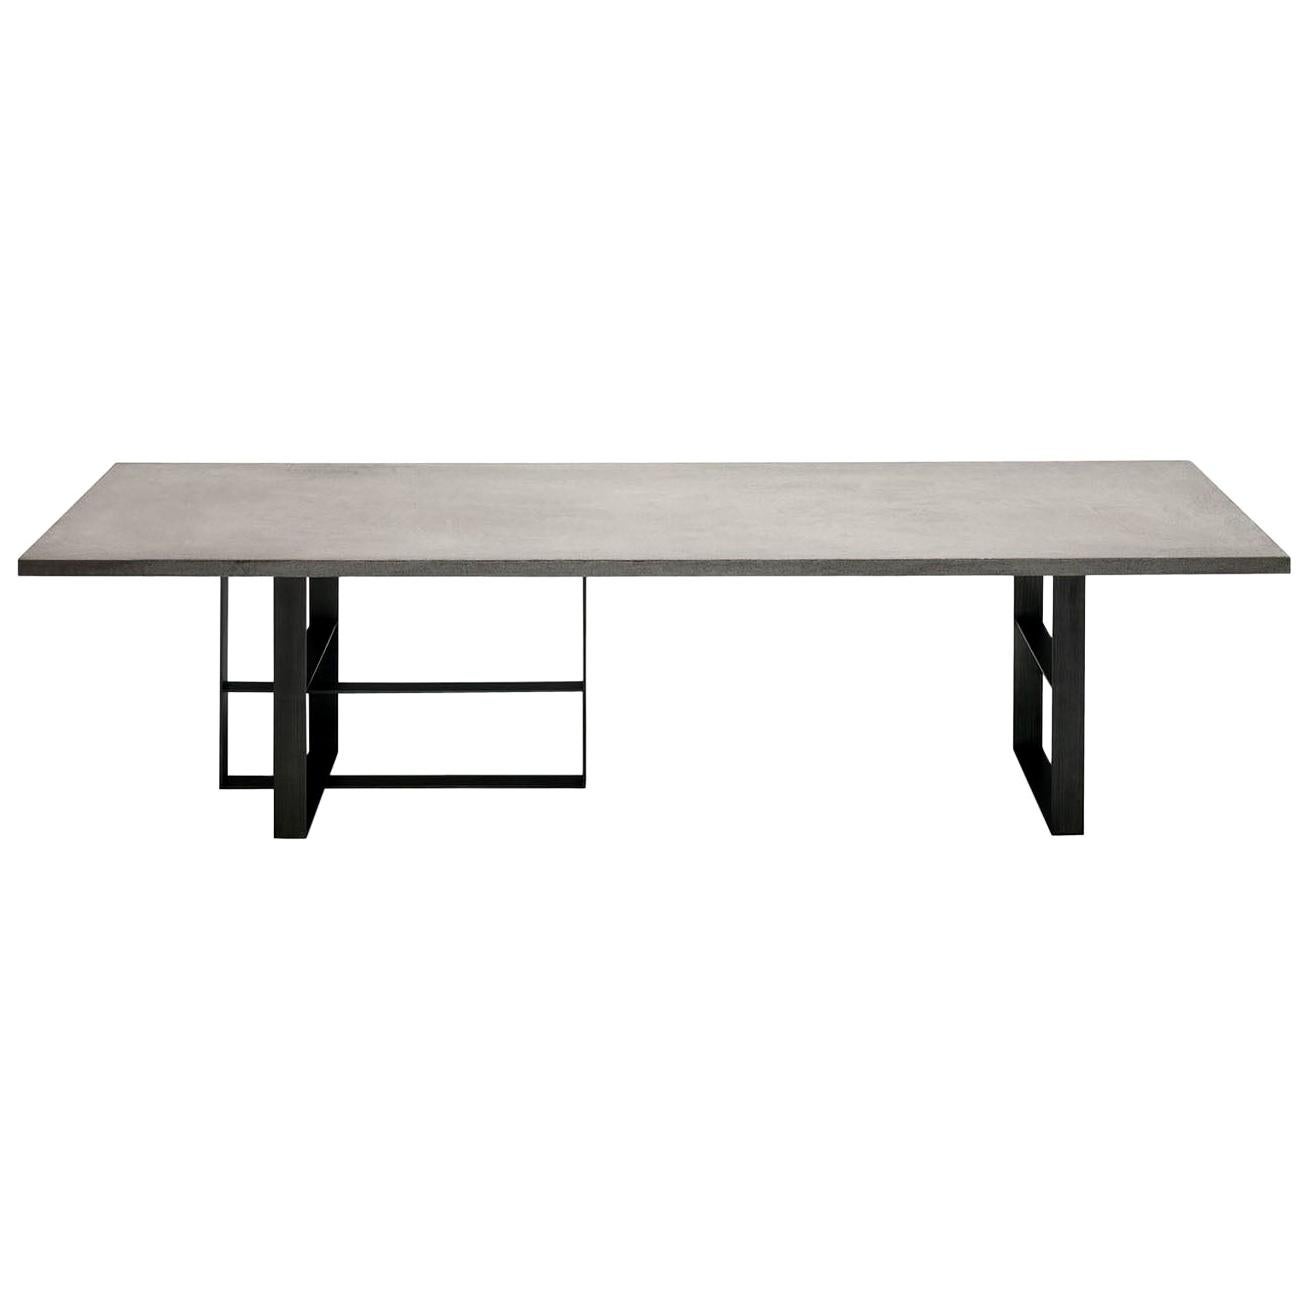 In Stock in Los Angeles, Grey Dining Table by Mist-o, Made in Italy